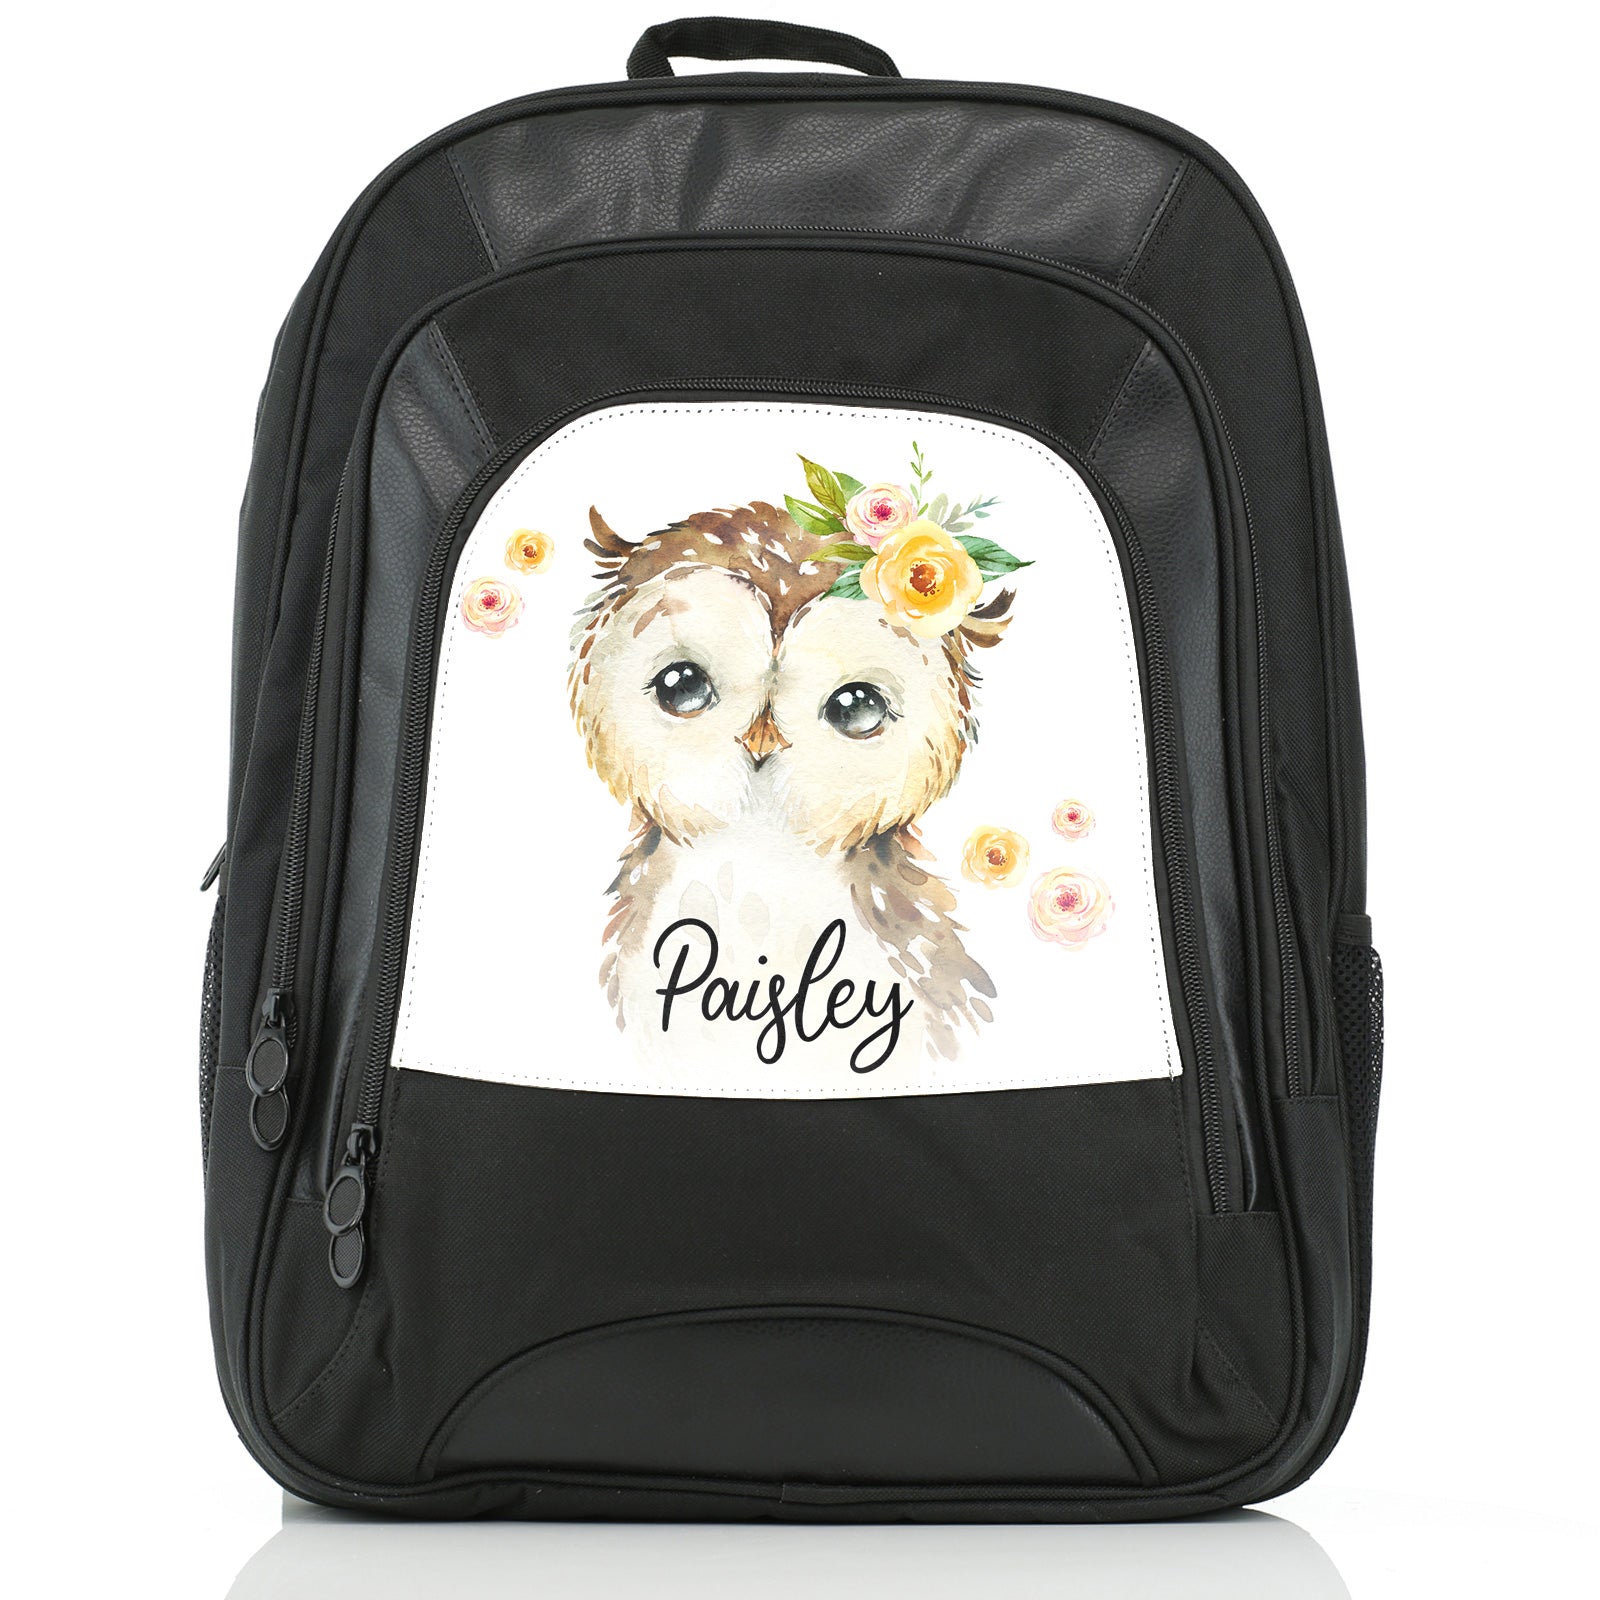 Personalised Large Multifunction Backpack with Brown Owl Yellow Flowers and Cute Text